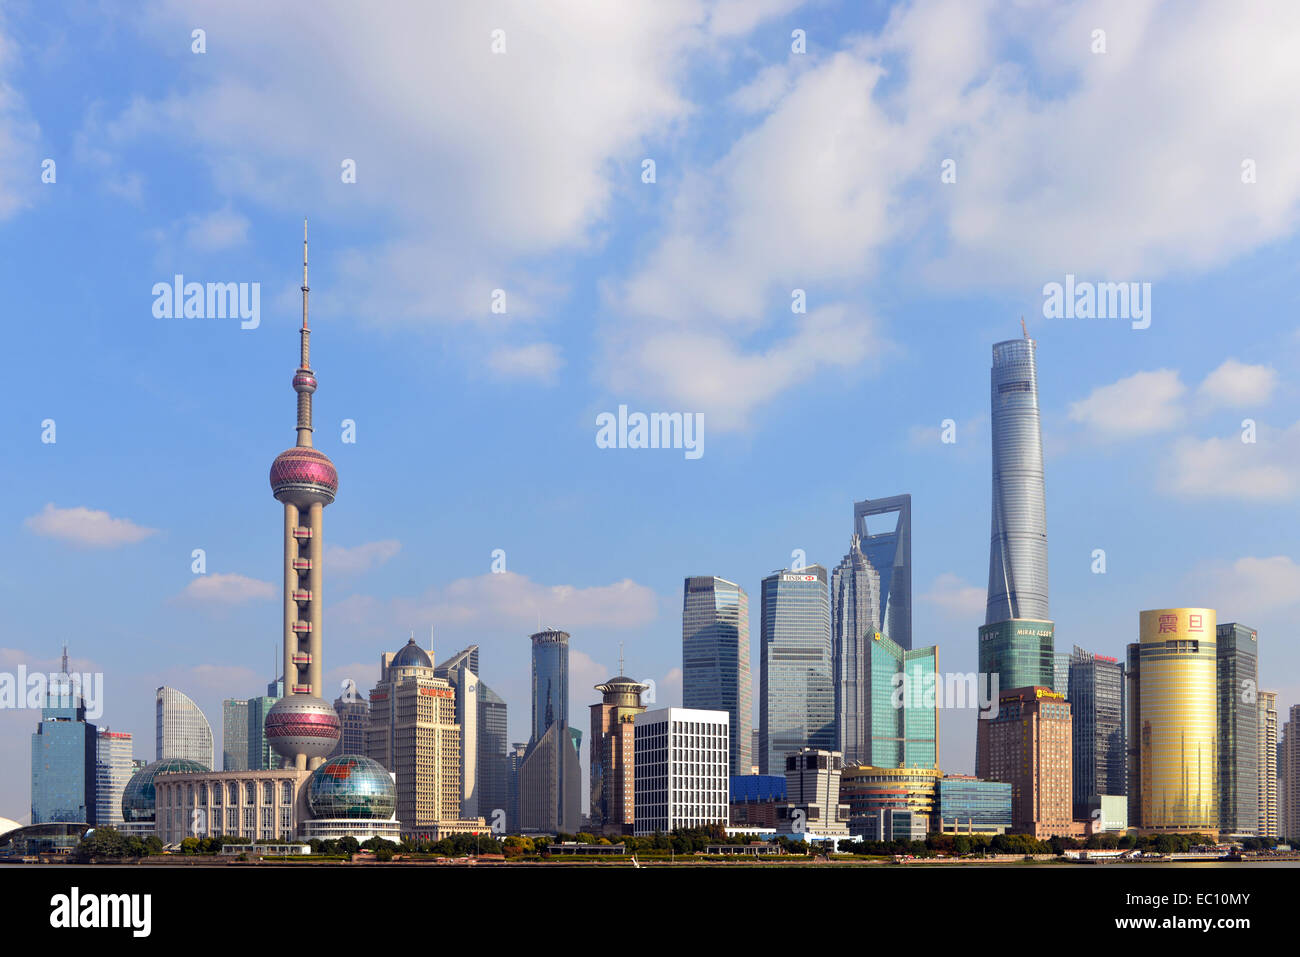 The magnificent skyline of Shanghai on a sunny day, as seen from across the Bund. Stock Photo